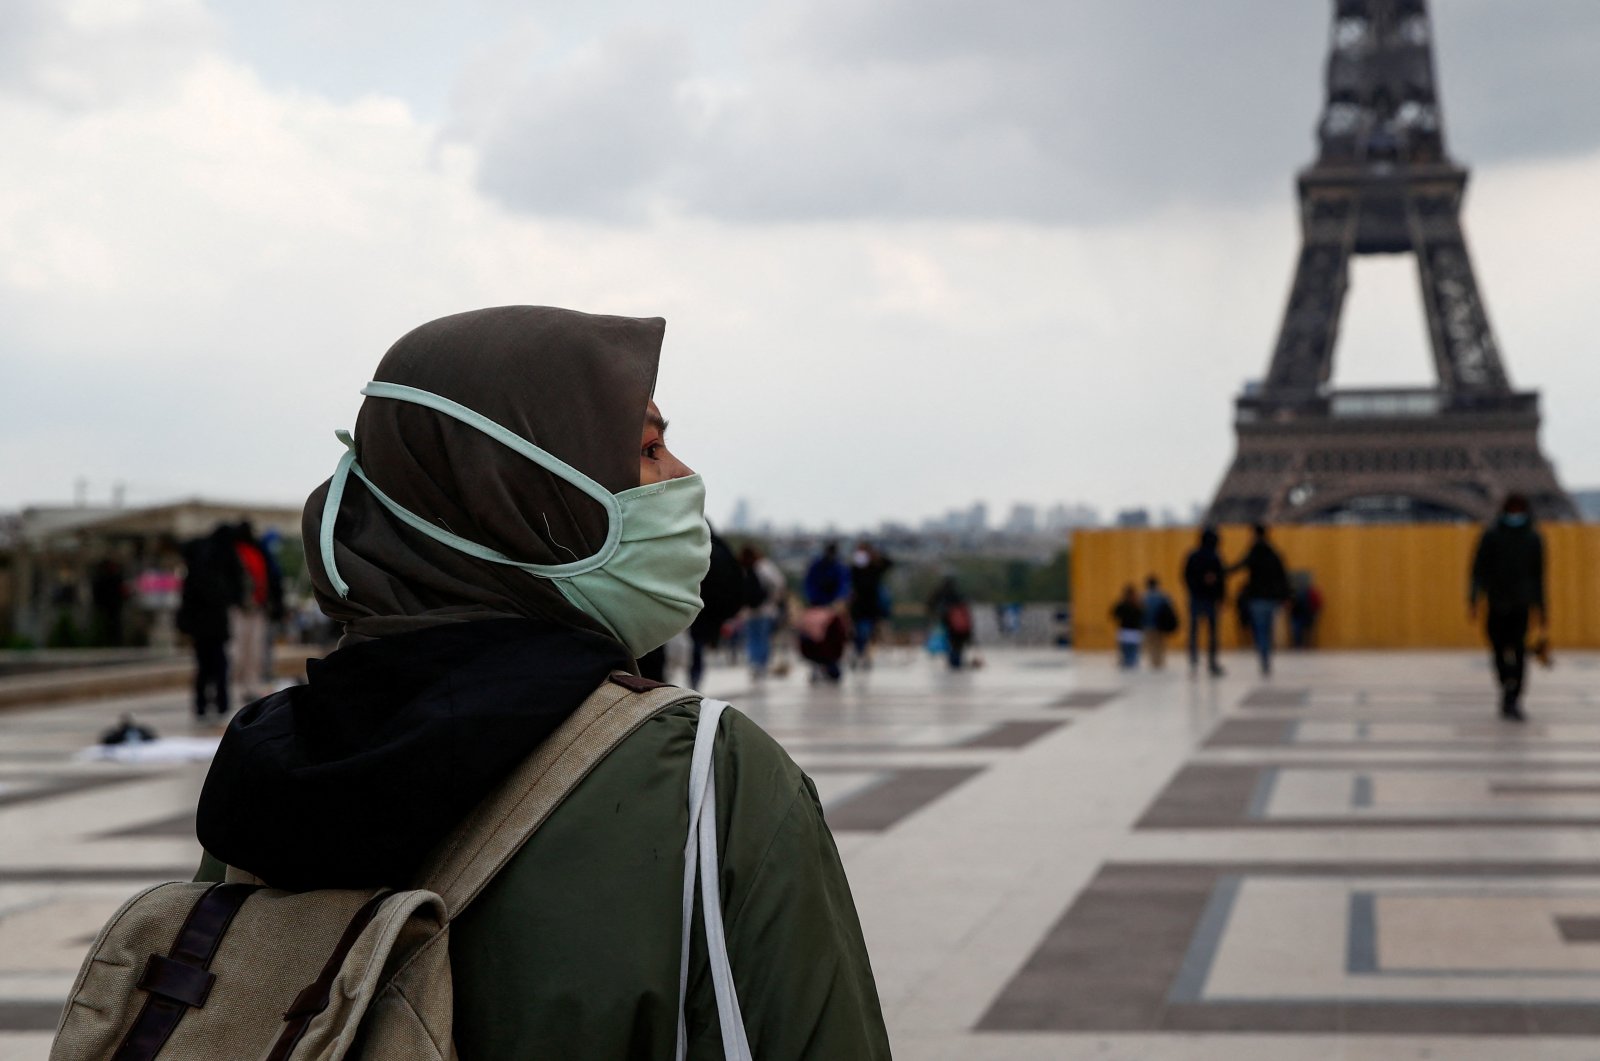 A woman, wearing a hijab and a protective face mask, walks at Trocadero square near the Eiffel Tower in Paris, France, May 2, 2021. (Reuters File Photo)